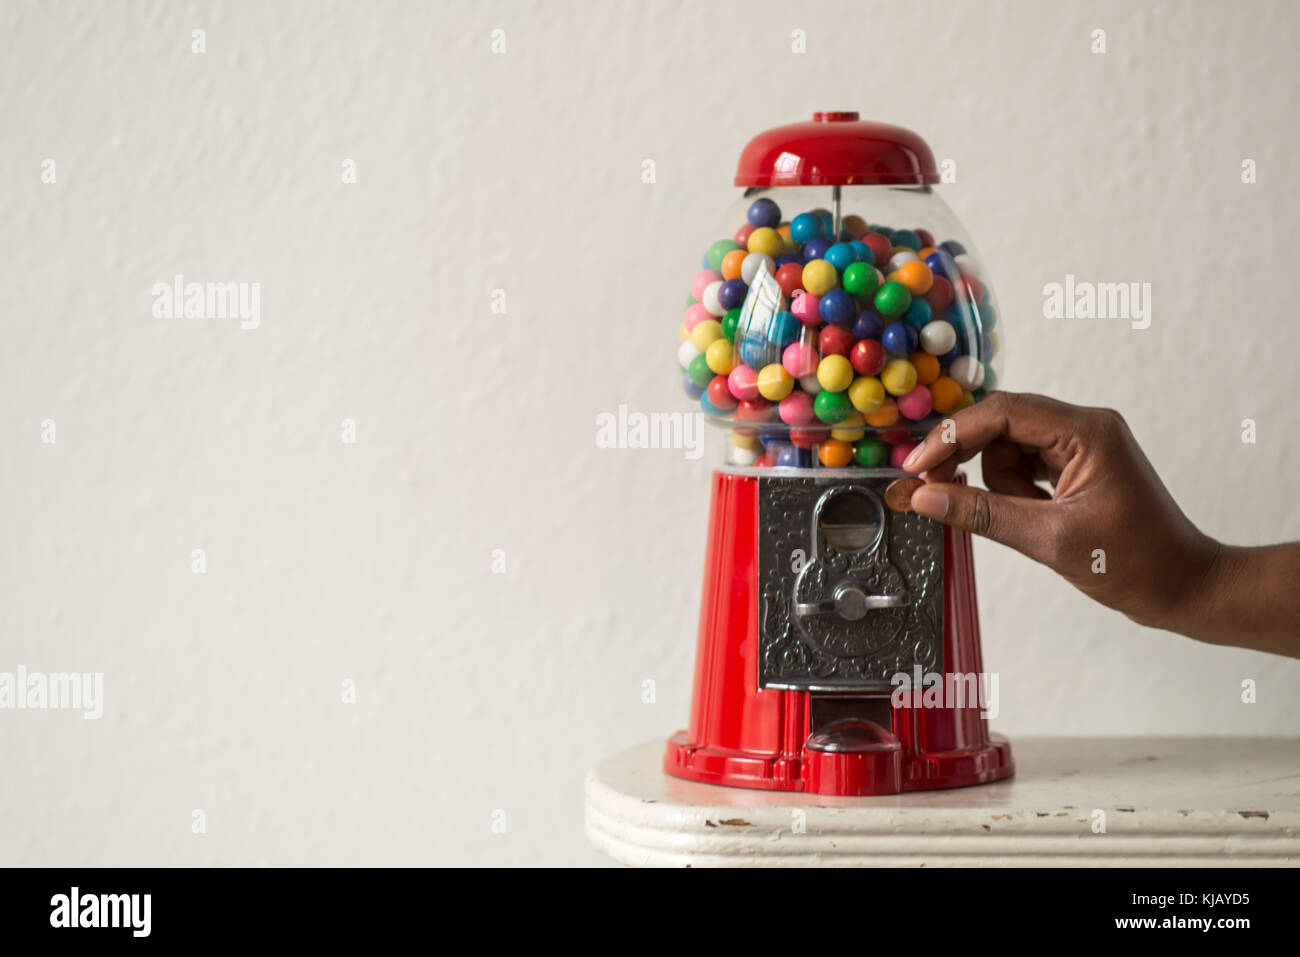 Vintage Red Chewing Gum-ball Machine Stock Photo